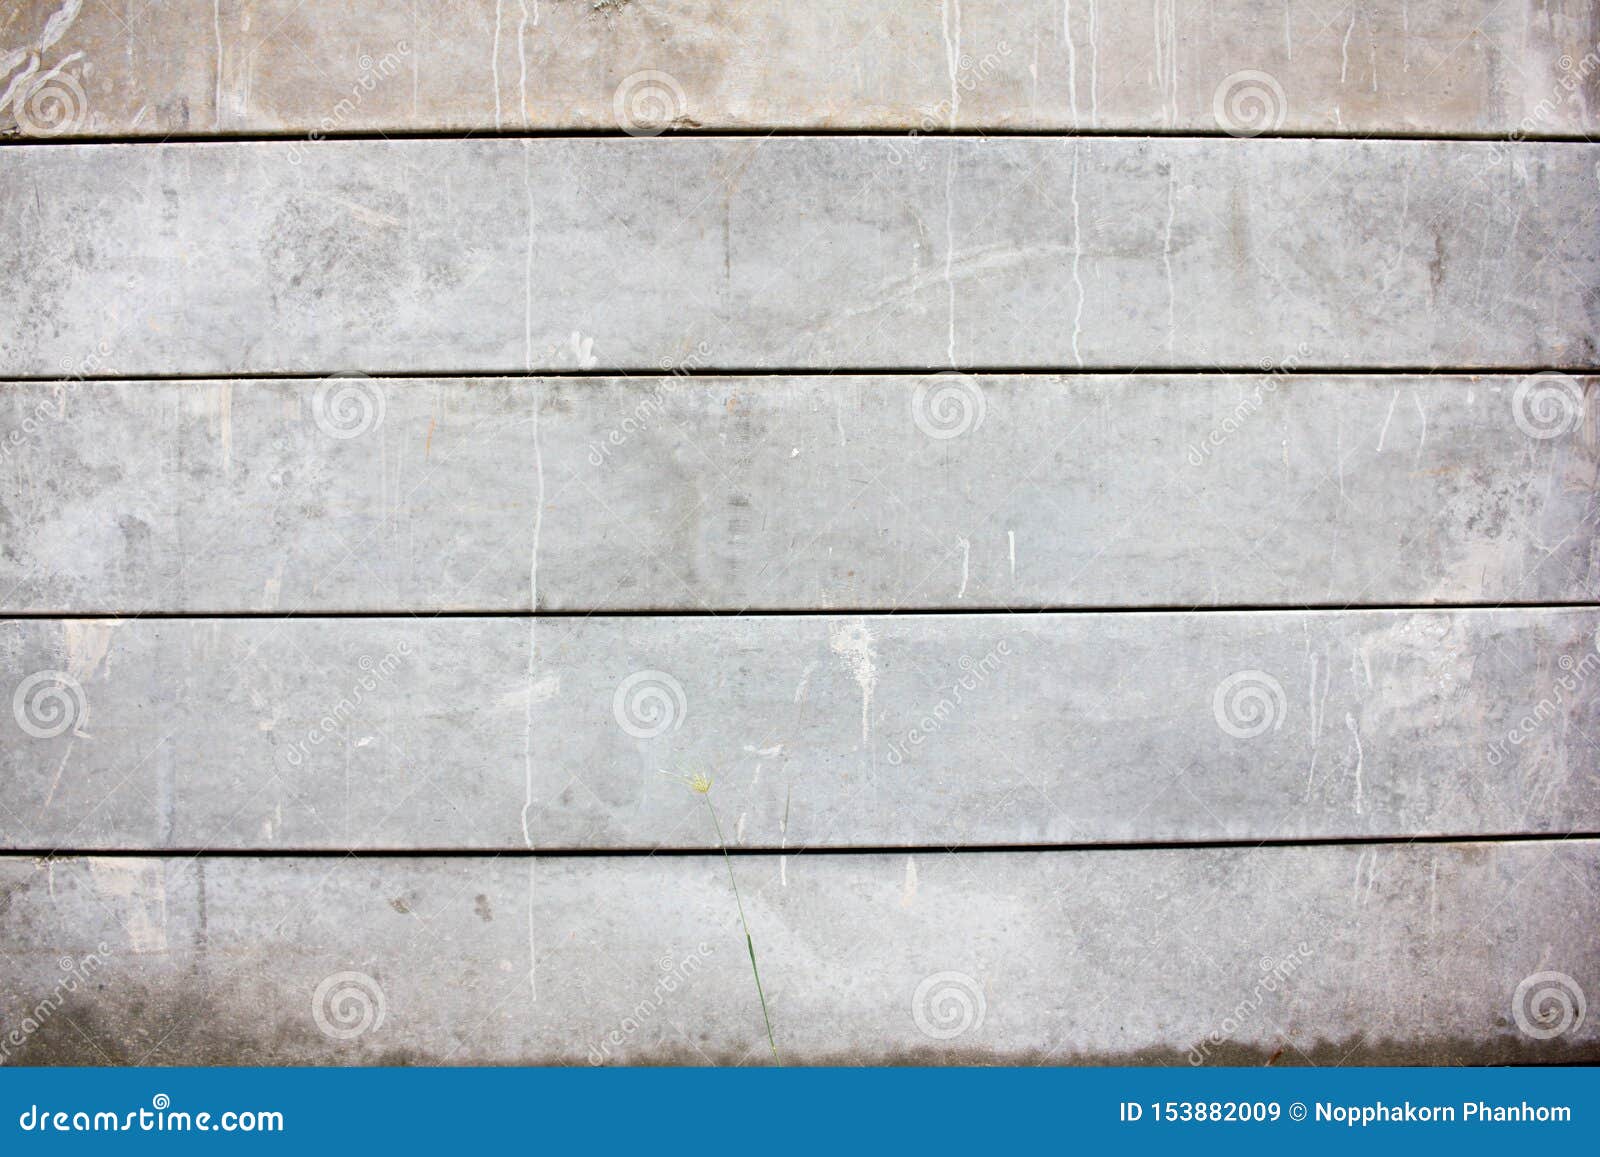 Wall Background Plaster Plastering Wallpaper Stock Image - Image of cement,  design: 153882009